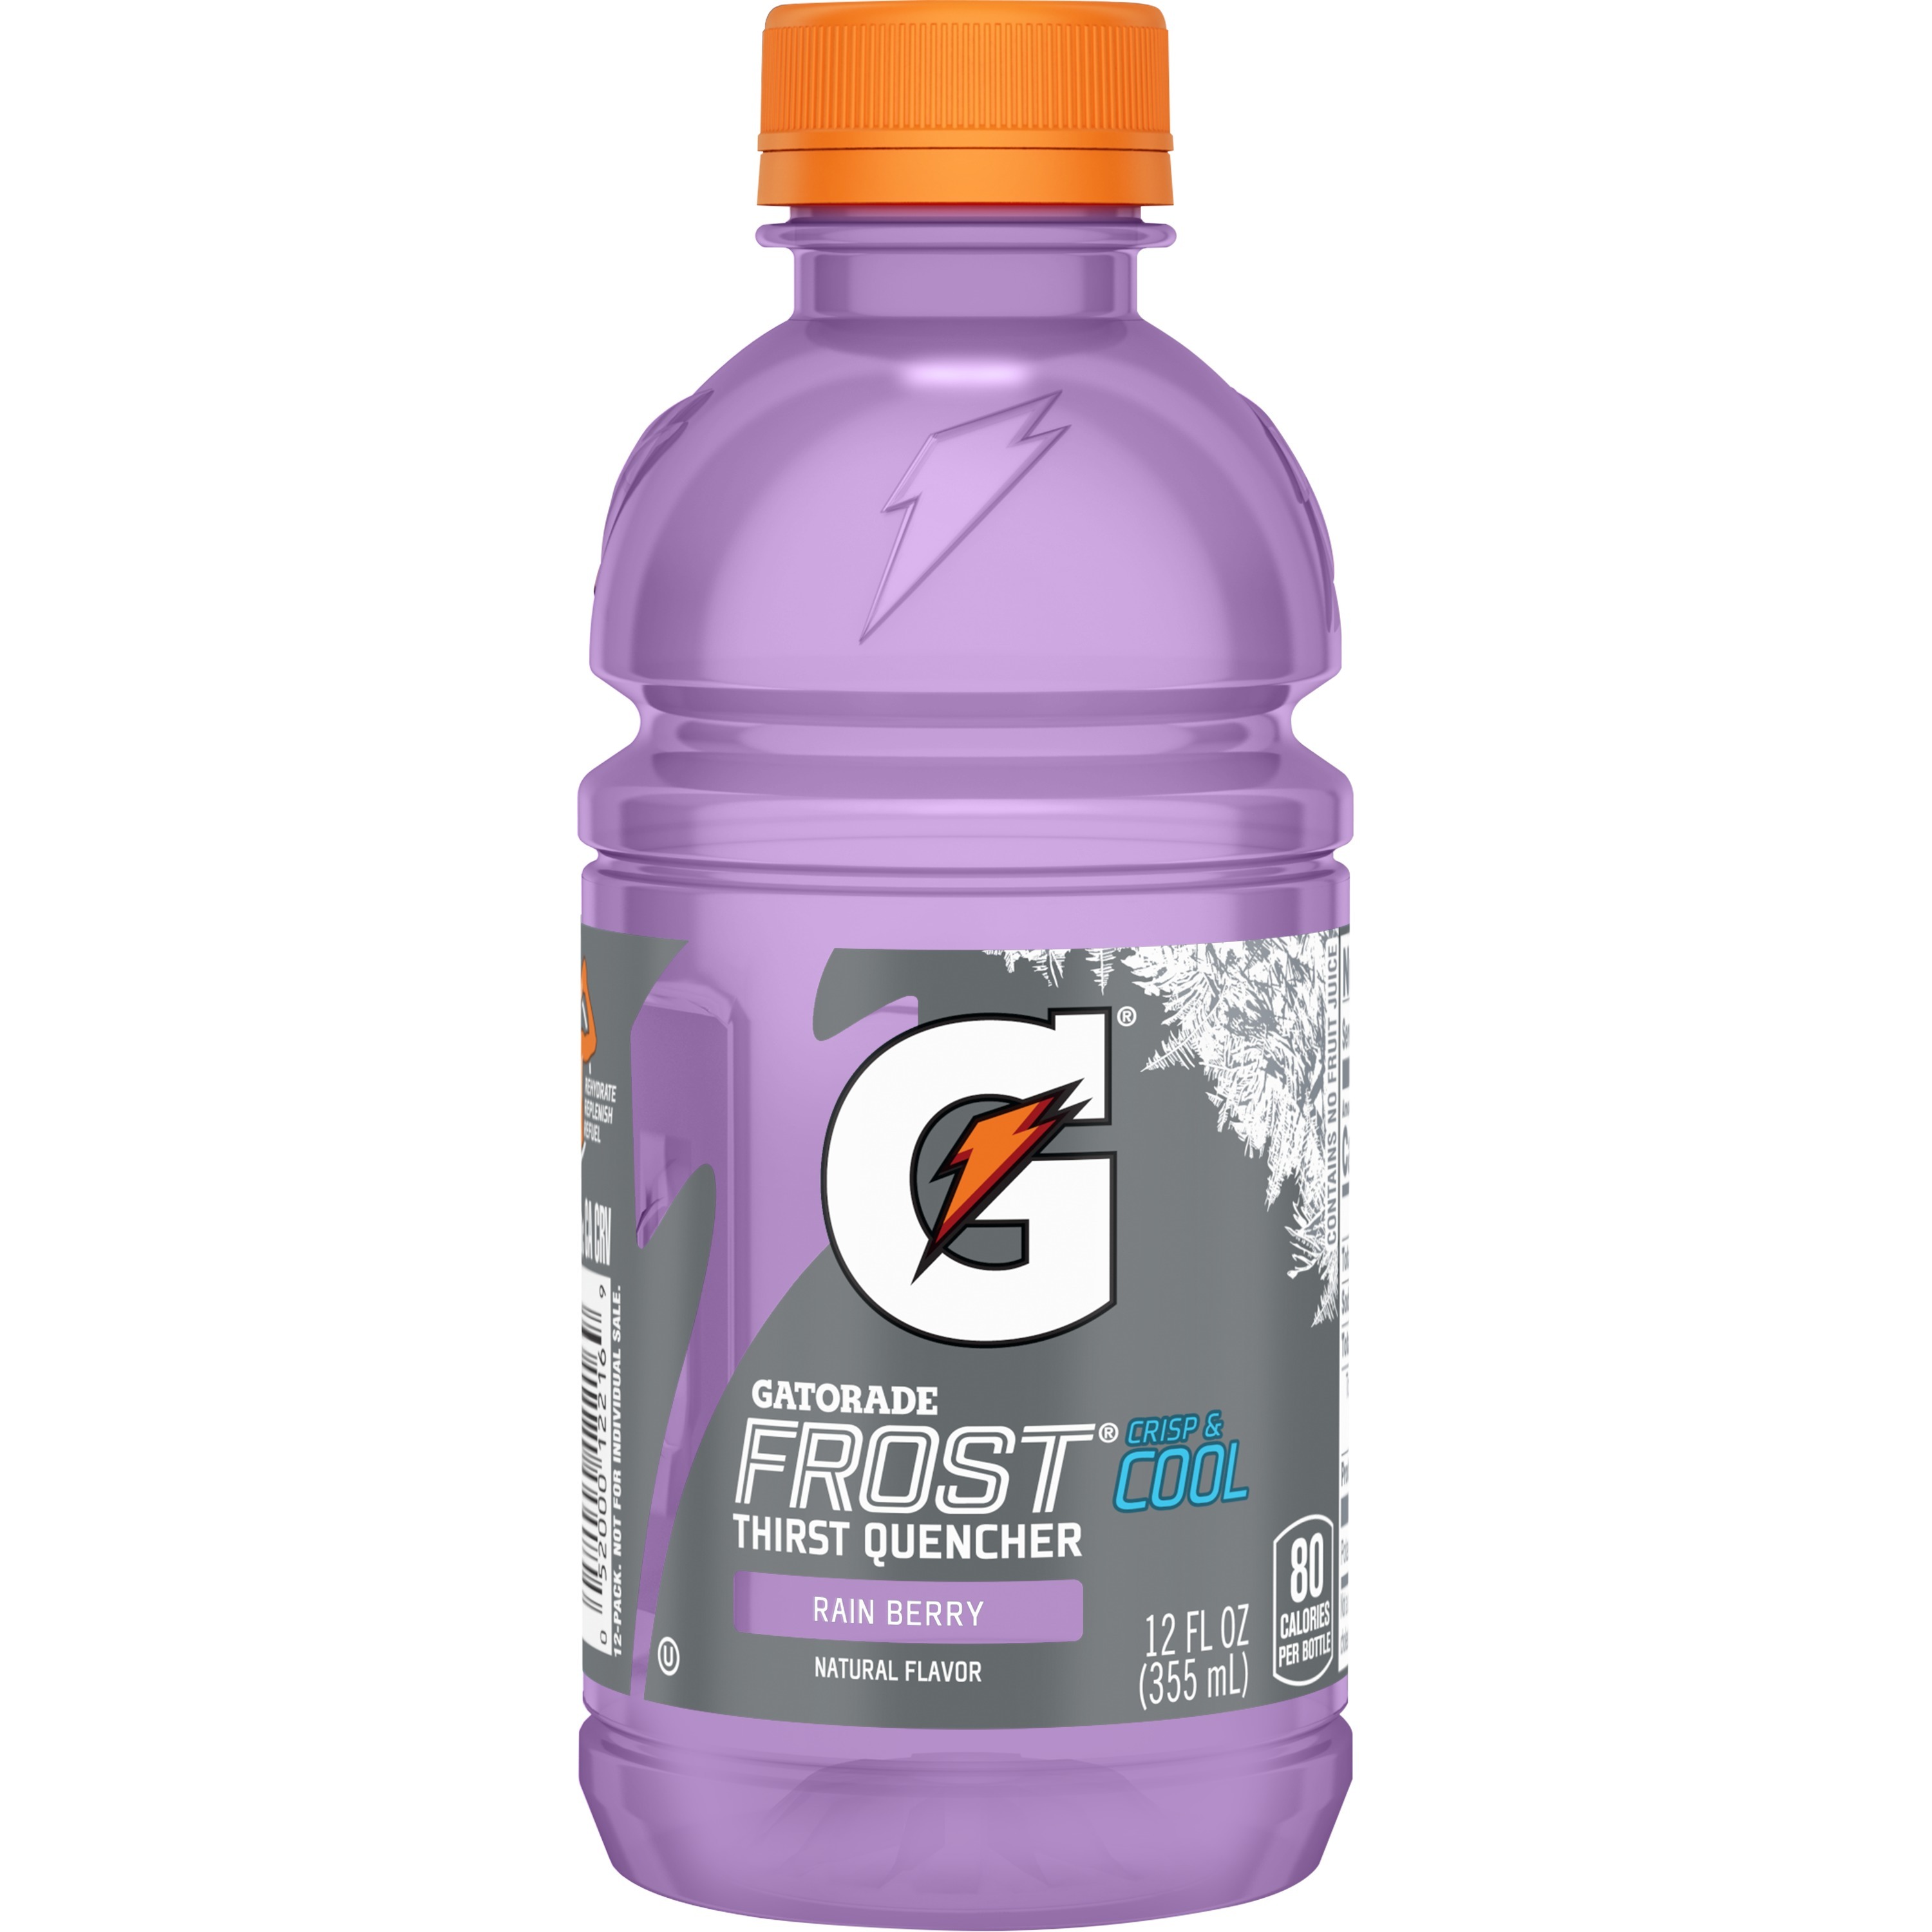 Gatorade Frost Thirst Quencher Rain Berry Sports Drink, 12 fl oz, 12 Count Bottles - image 3 of 8